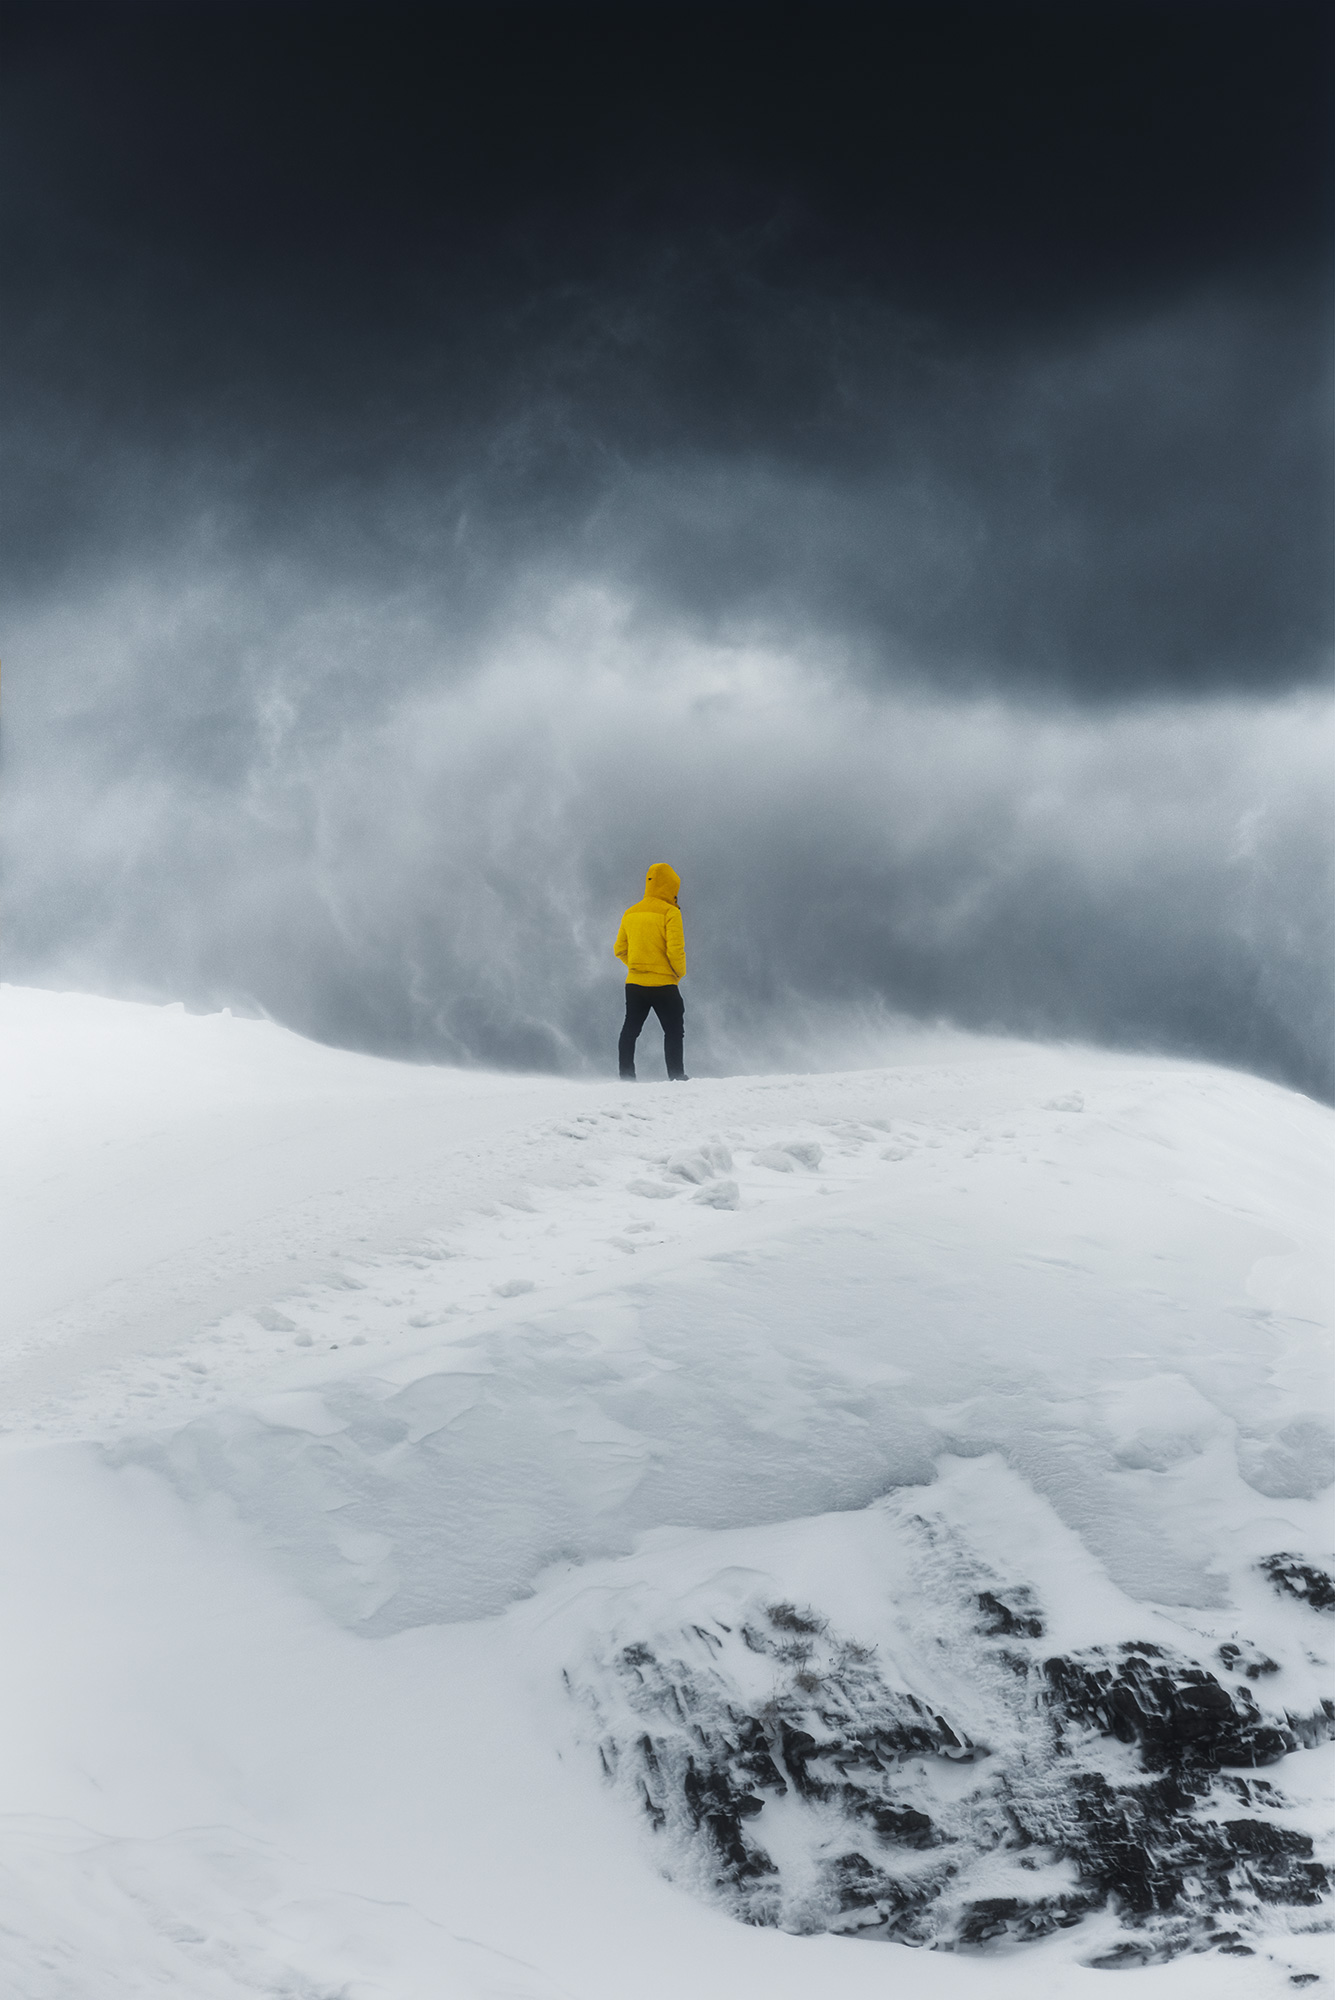 Swiss artist Jennifer Esseiva skillfully captures the essence of a winter snowstorm at Mesch-Fruttsee, Switzerland, through her lens with the Nikon Z8. In this striking landscape photograph, a lone figure clad in a vibrant yellow jacket stands resilient against the elements. Explore the artistry of nature in the hands of Jennifer's photography.